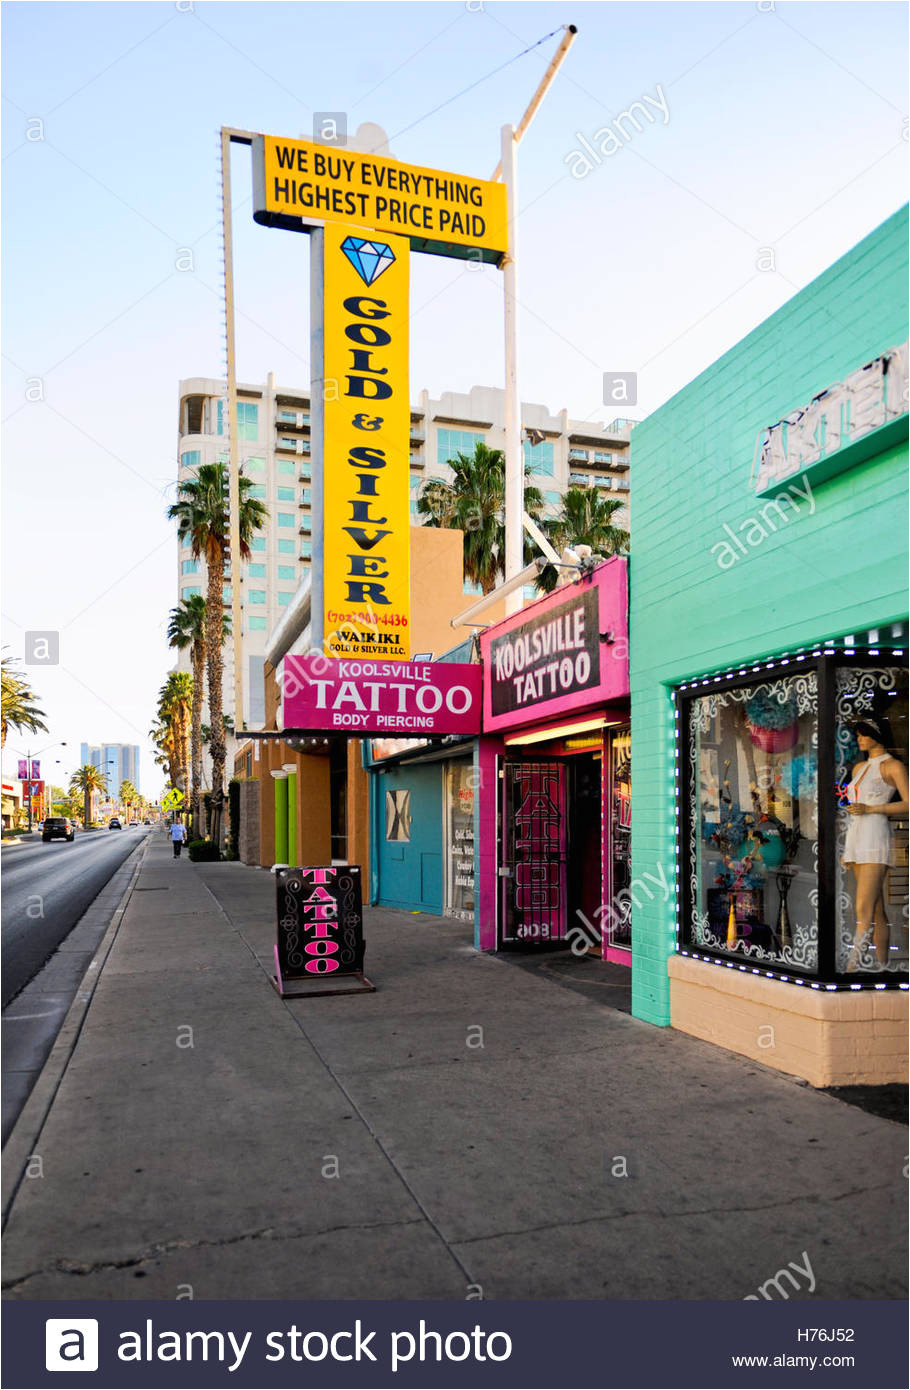 pawn shop and other storefronts at dusk in downtown las vegas nevada stock image